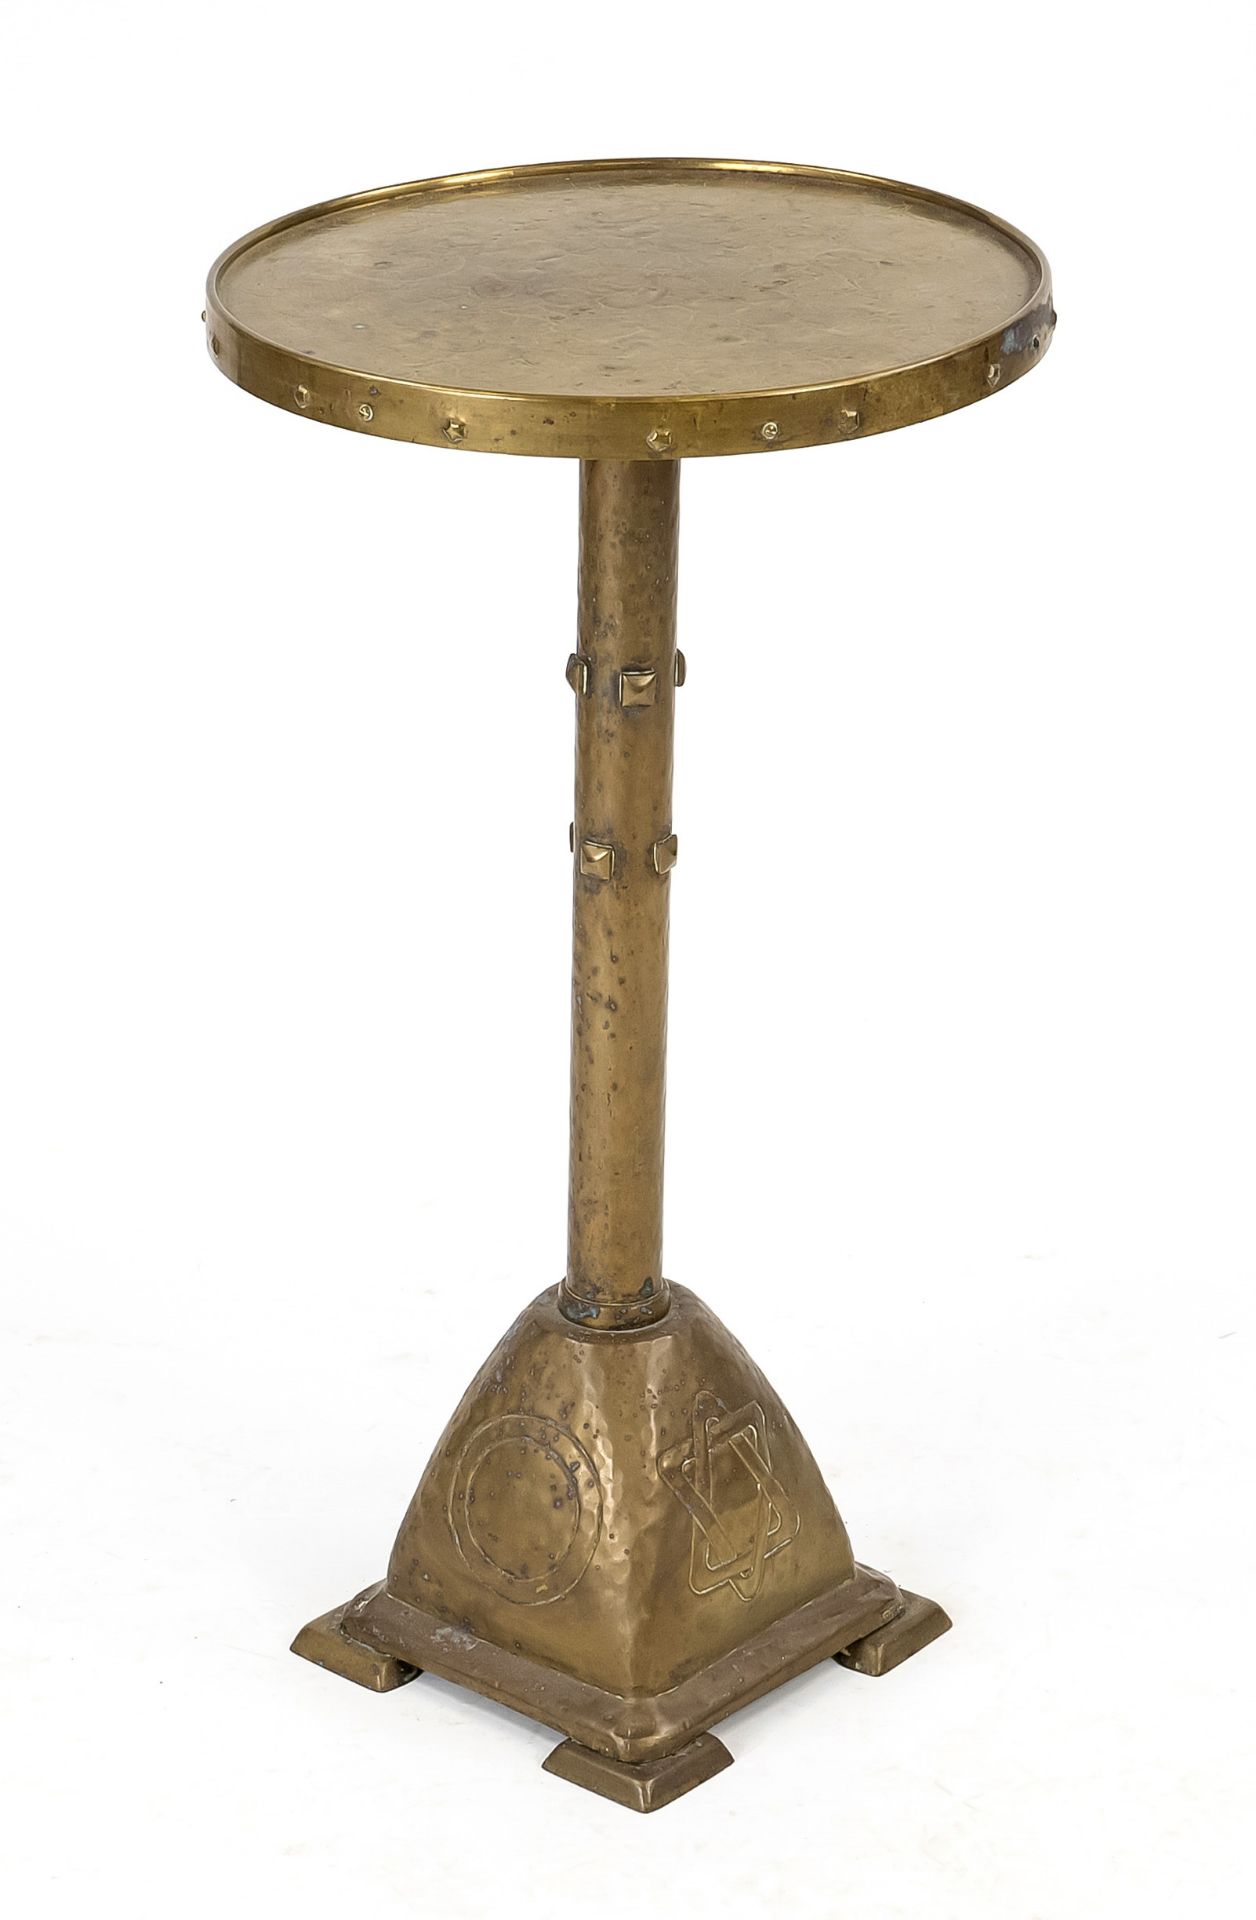 Occult art nouveau side table, brass, around 1900. four-piece base with large symbols, shaft with